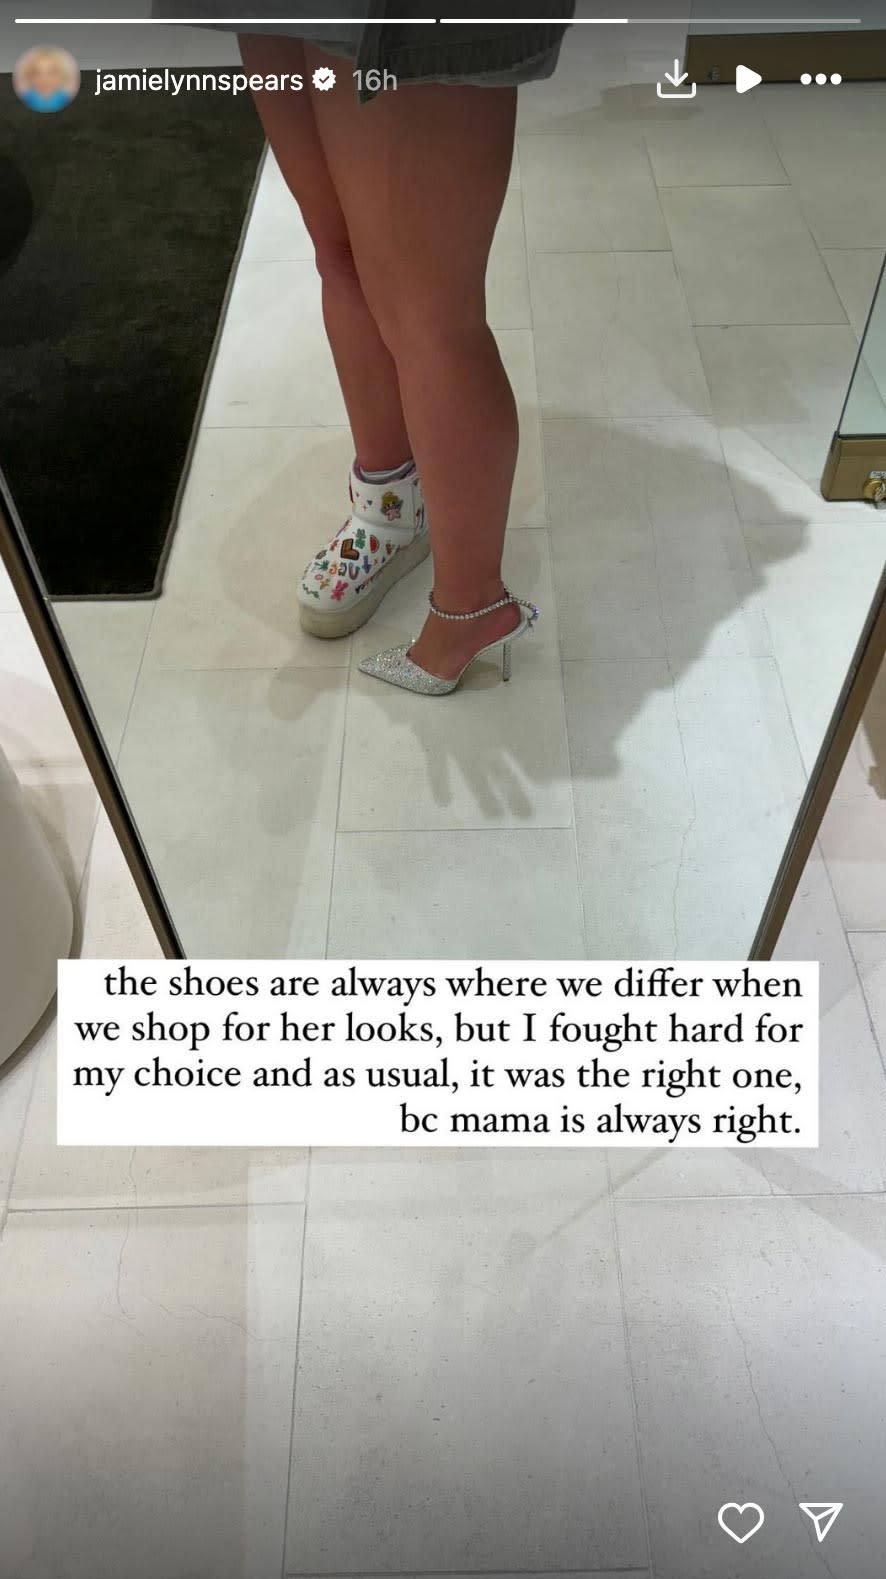 Jamie Lynn Spears ‘Fought Hard’ for Daughter Maddie’s Shoe Choice for Prom: ‘Mama is Always Right’